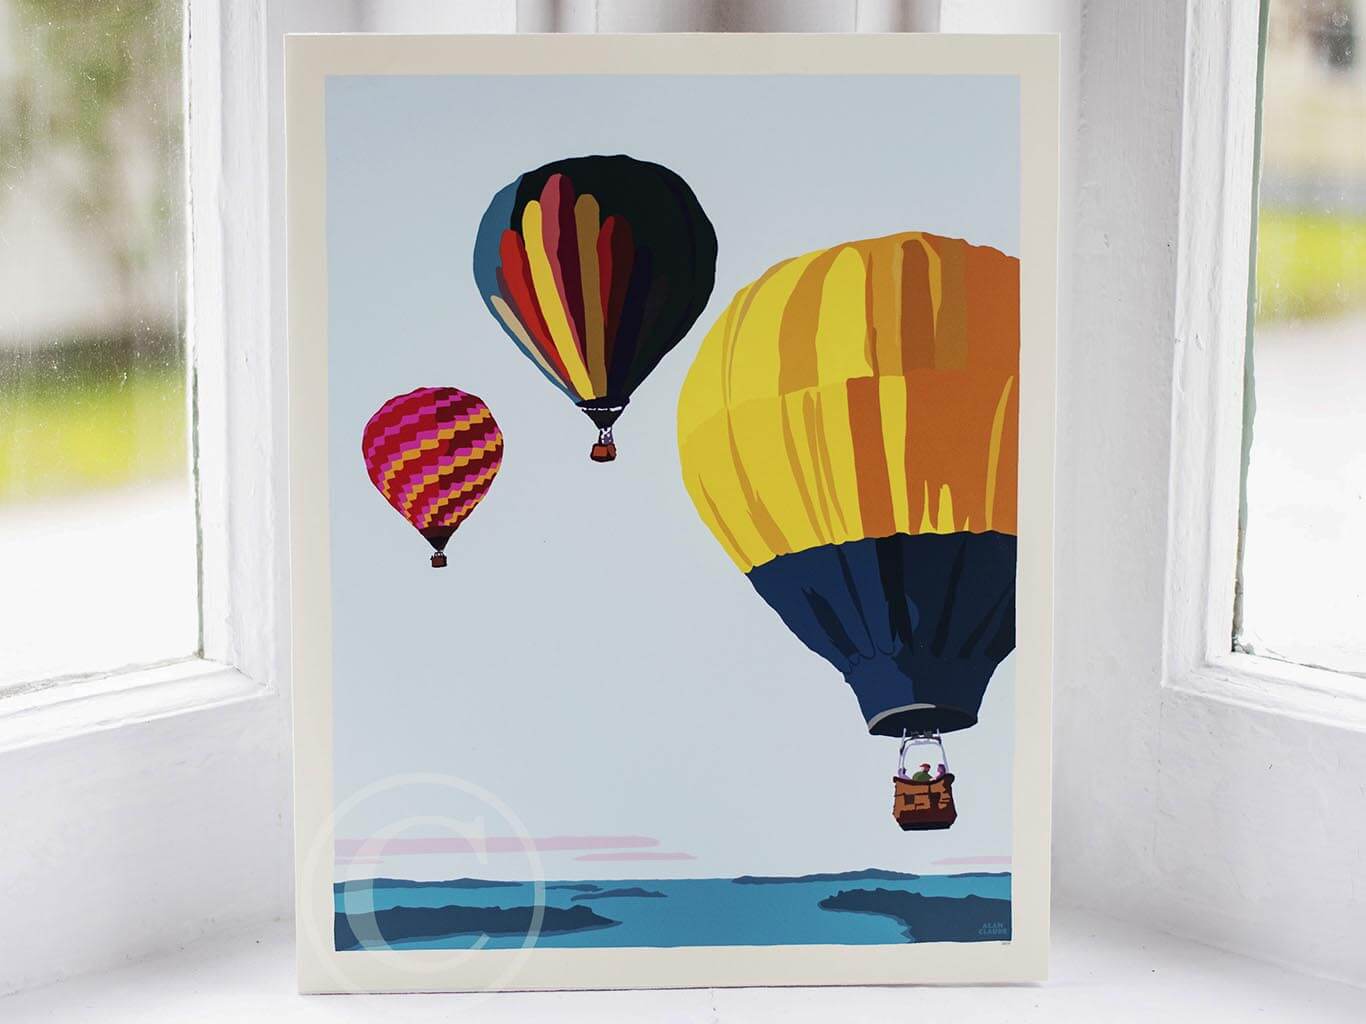 Balloons Over Islands Art Print 8" x 10" Wall Poster By Alan Claude - Maine